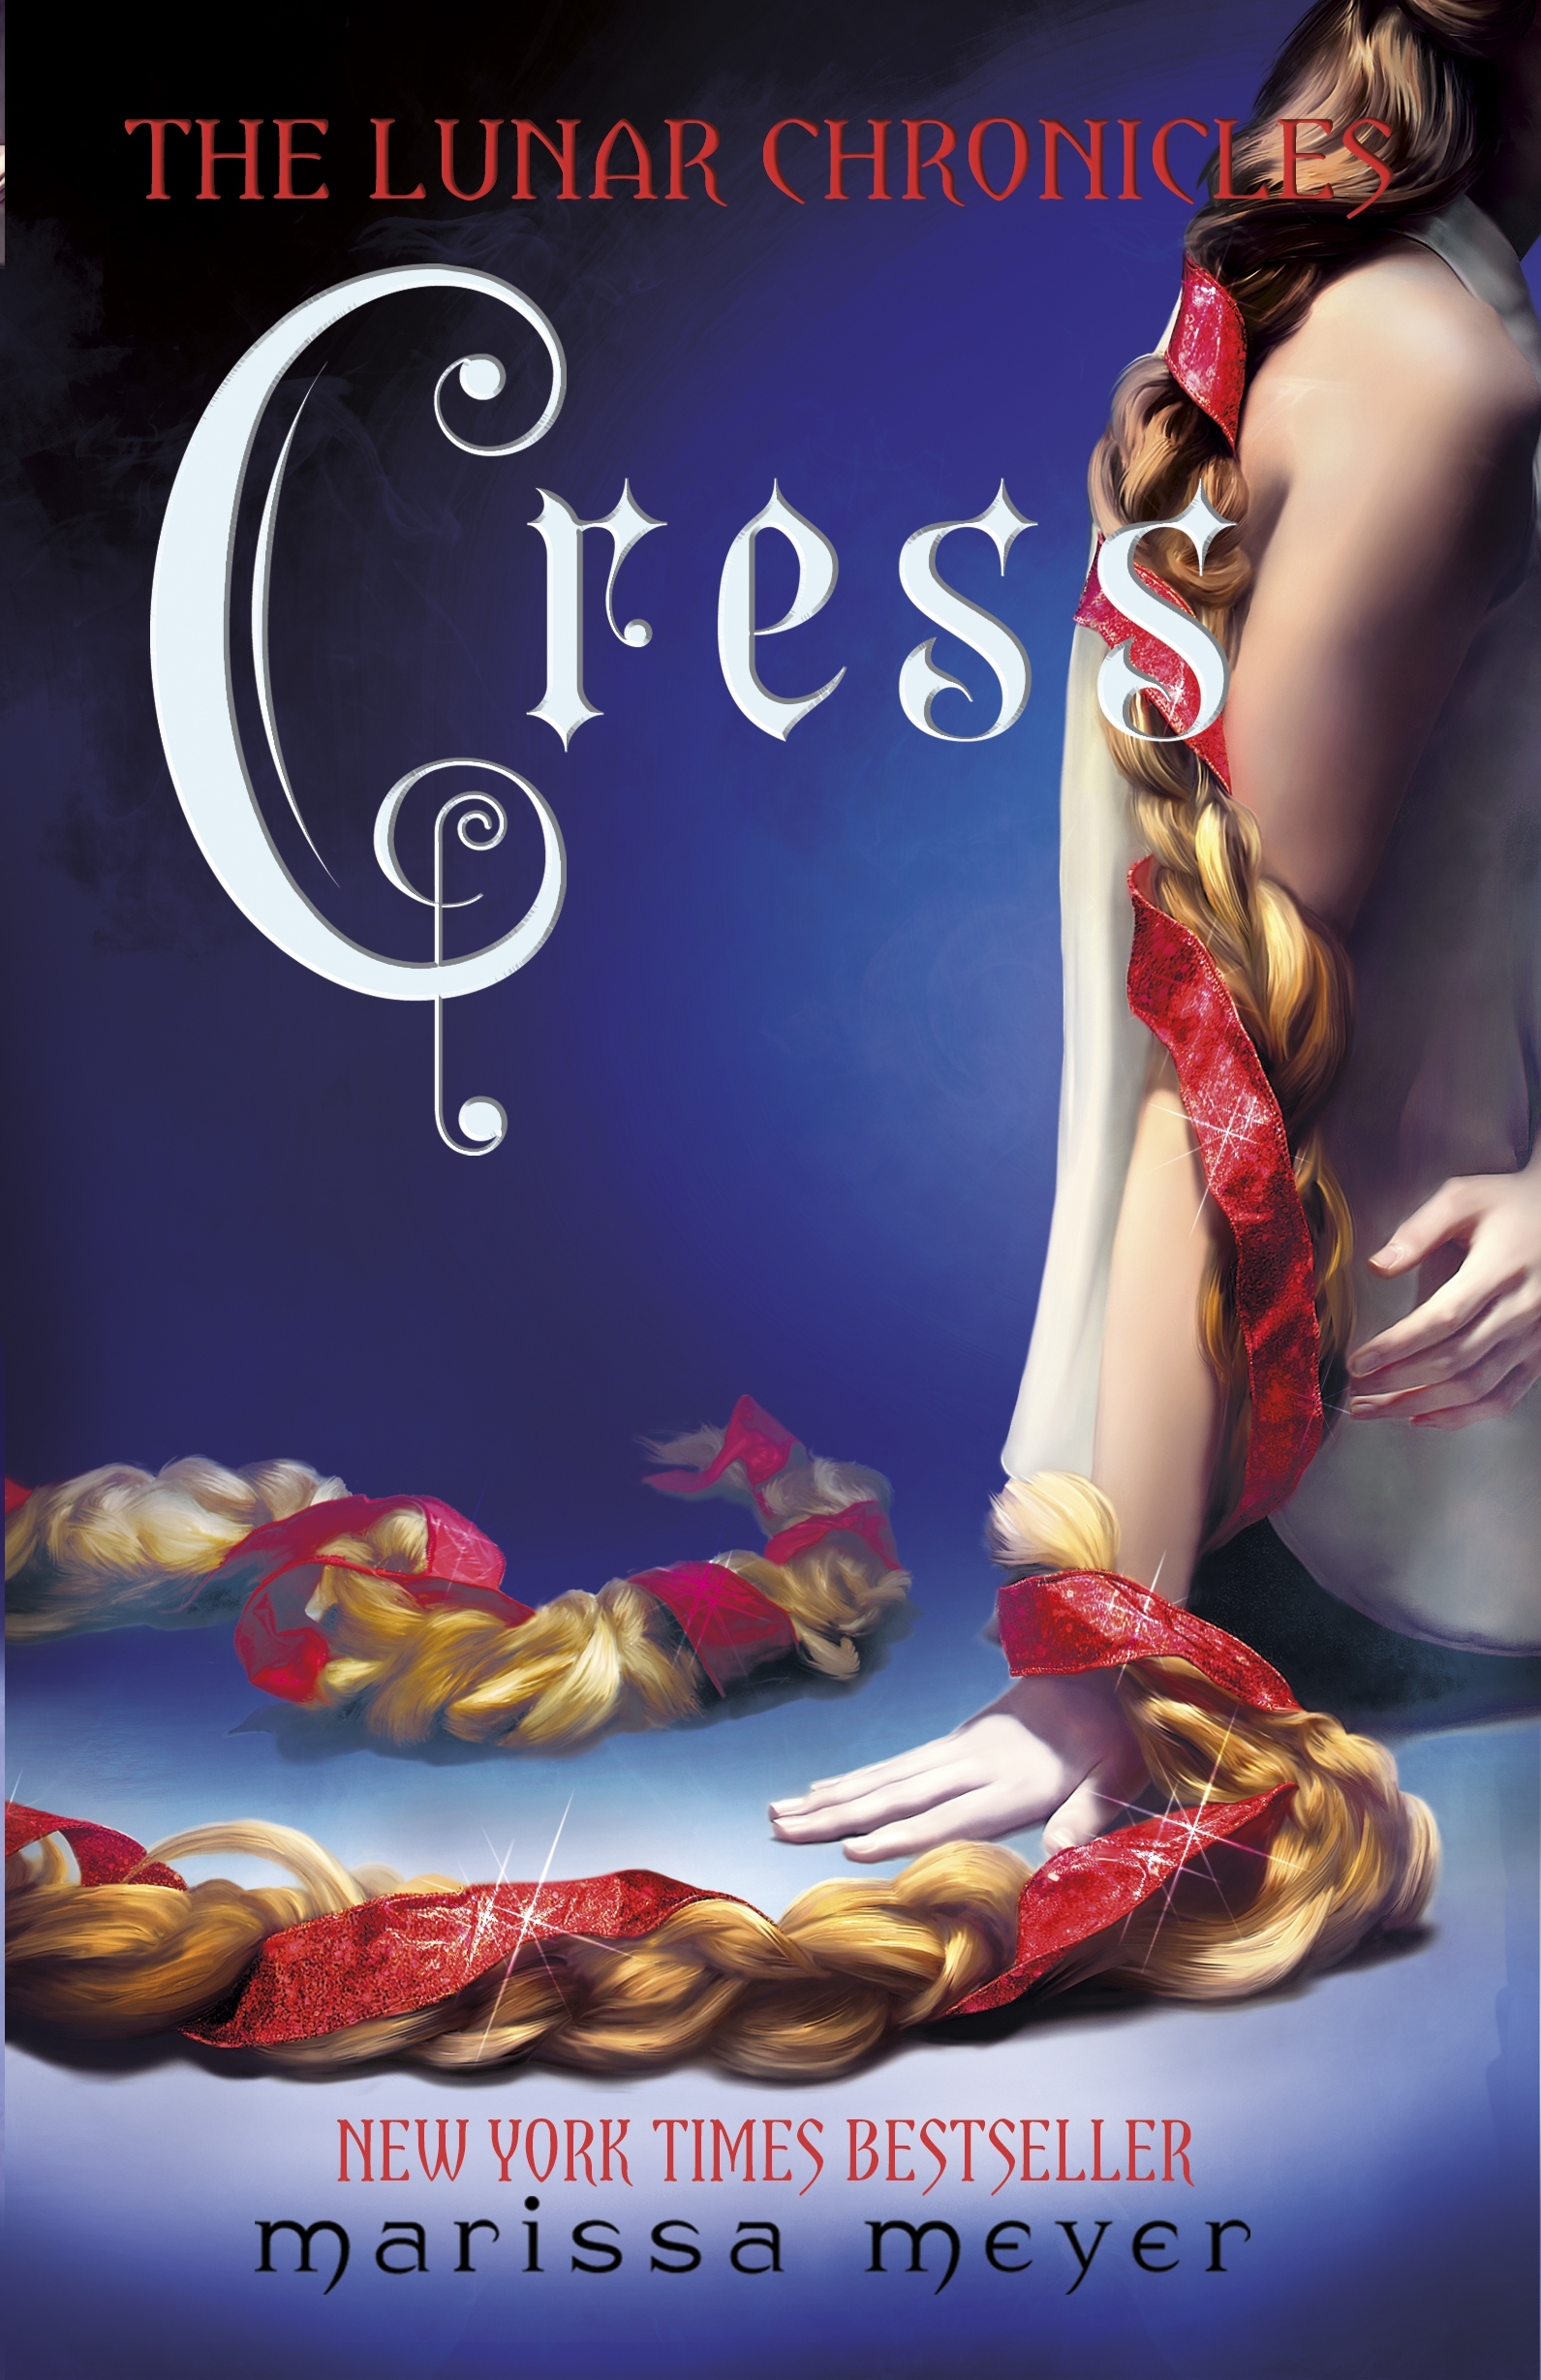 cress from the lunar chronicles